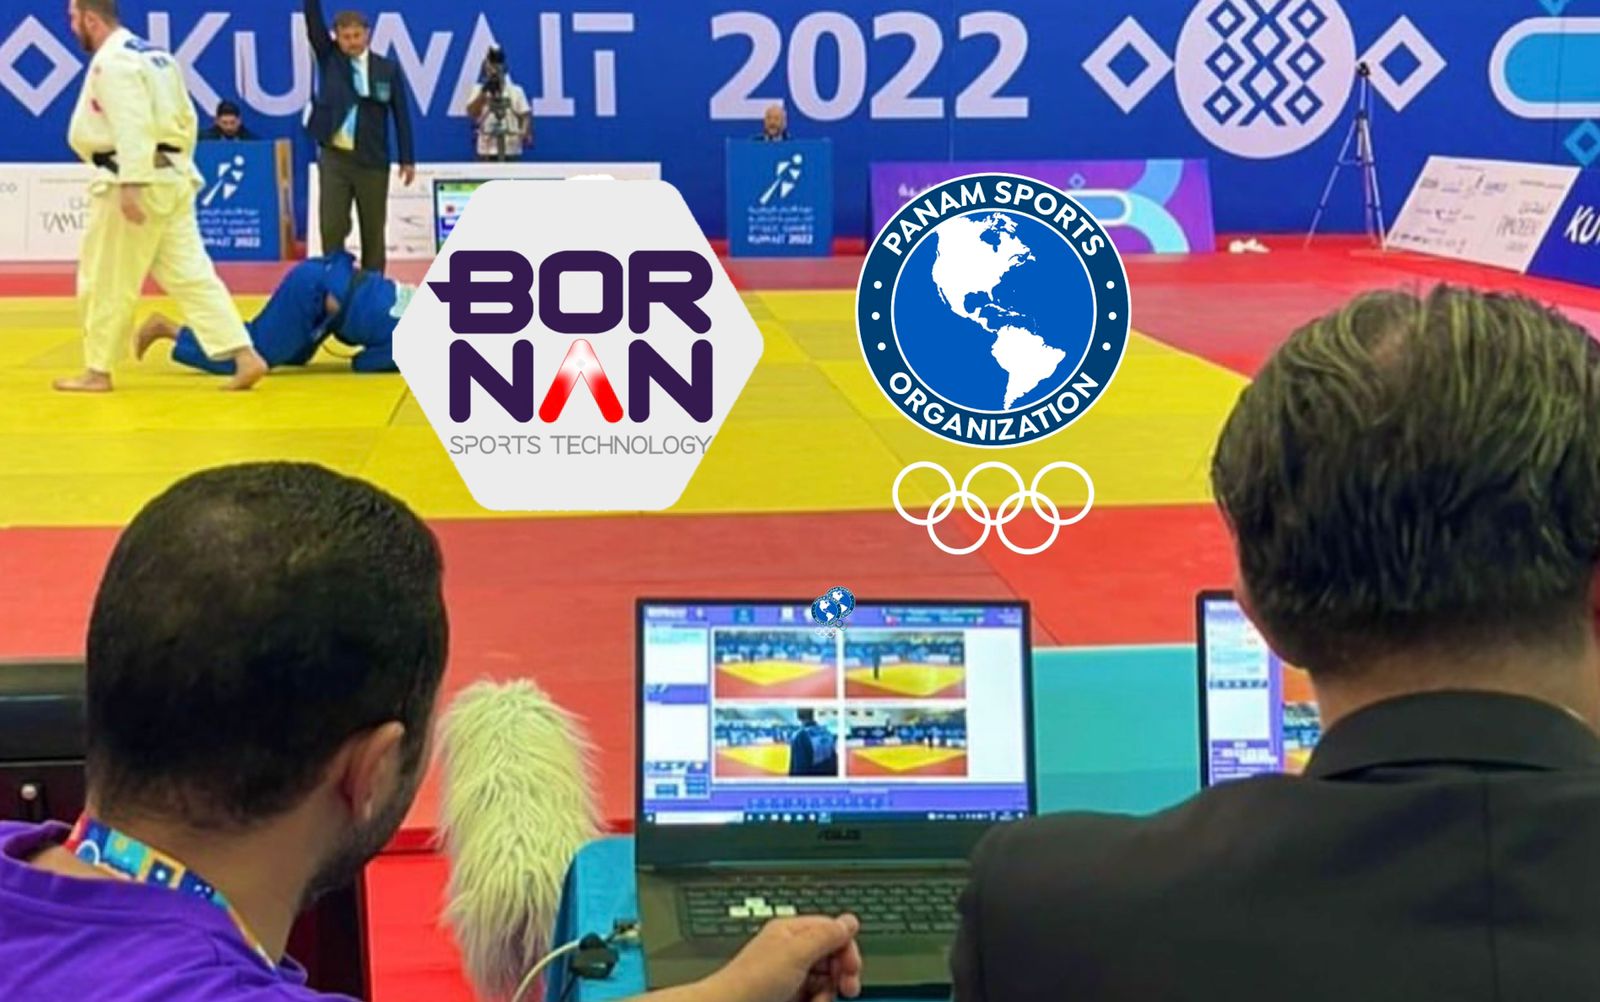 BORNAN JOINS PANAM SPORTS AS OFFICIAL TECHNOLOGY PROVIDER